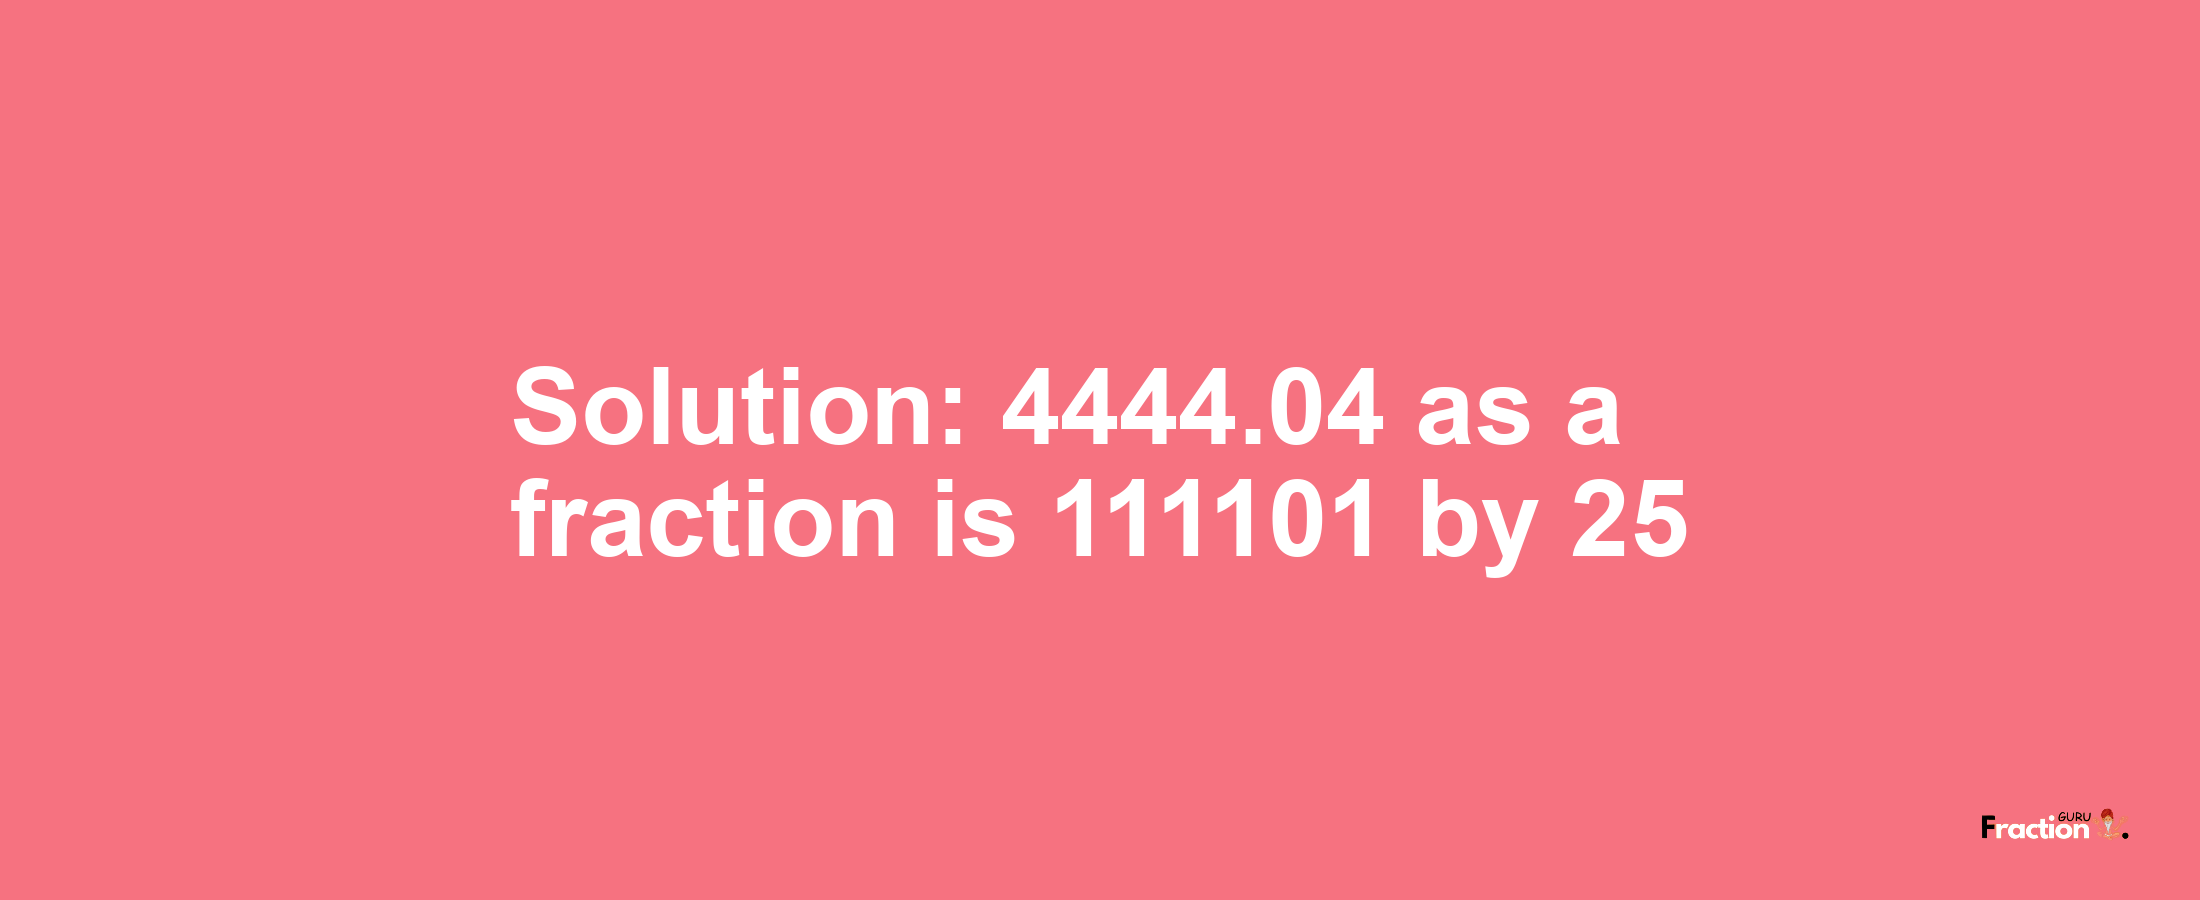 Solution:4444.04 as a fraction is 111101/25